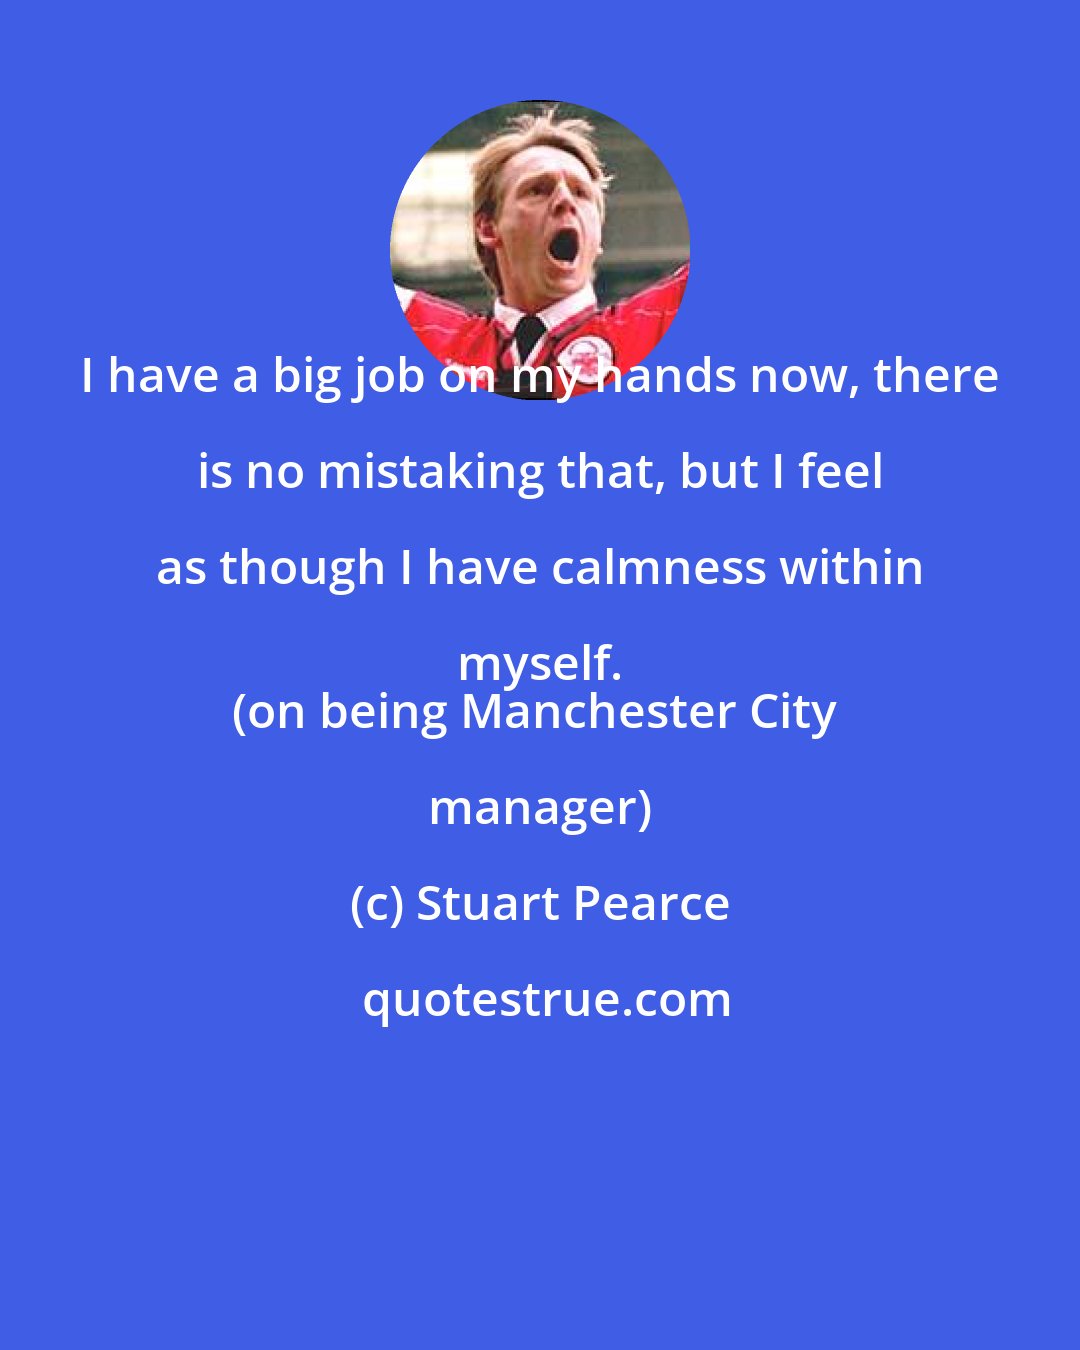 Stuart Pearce: I have a big job on my hands now, there is no mistaking that, but I feel as though I have calmness within myself. 
(on being Manchester City manager)